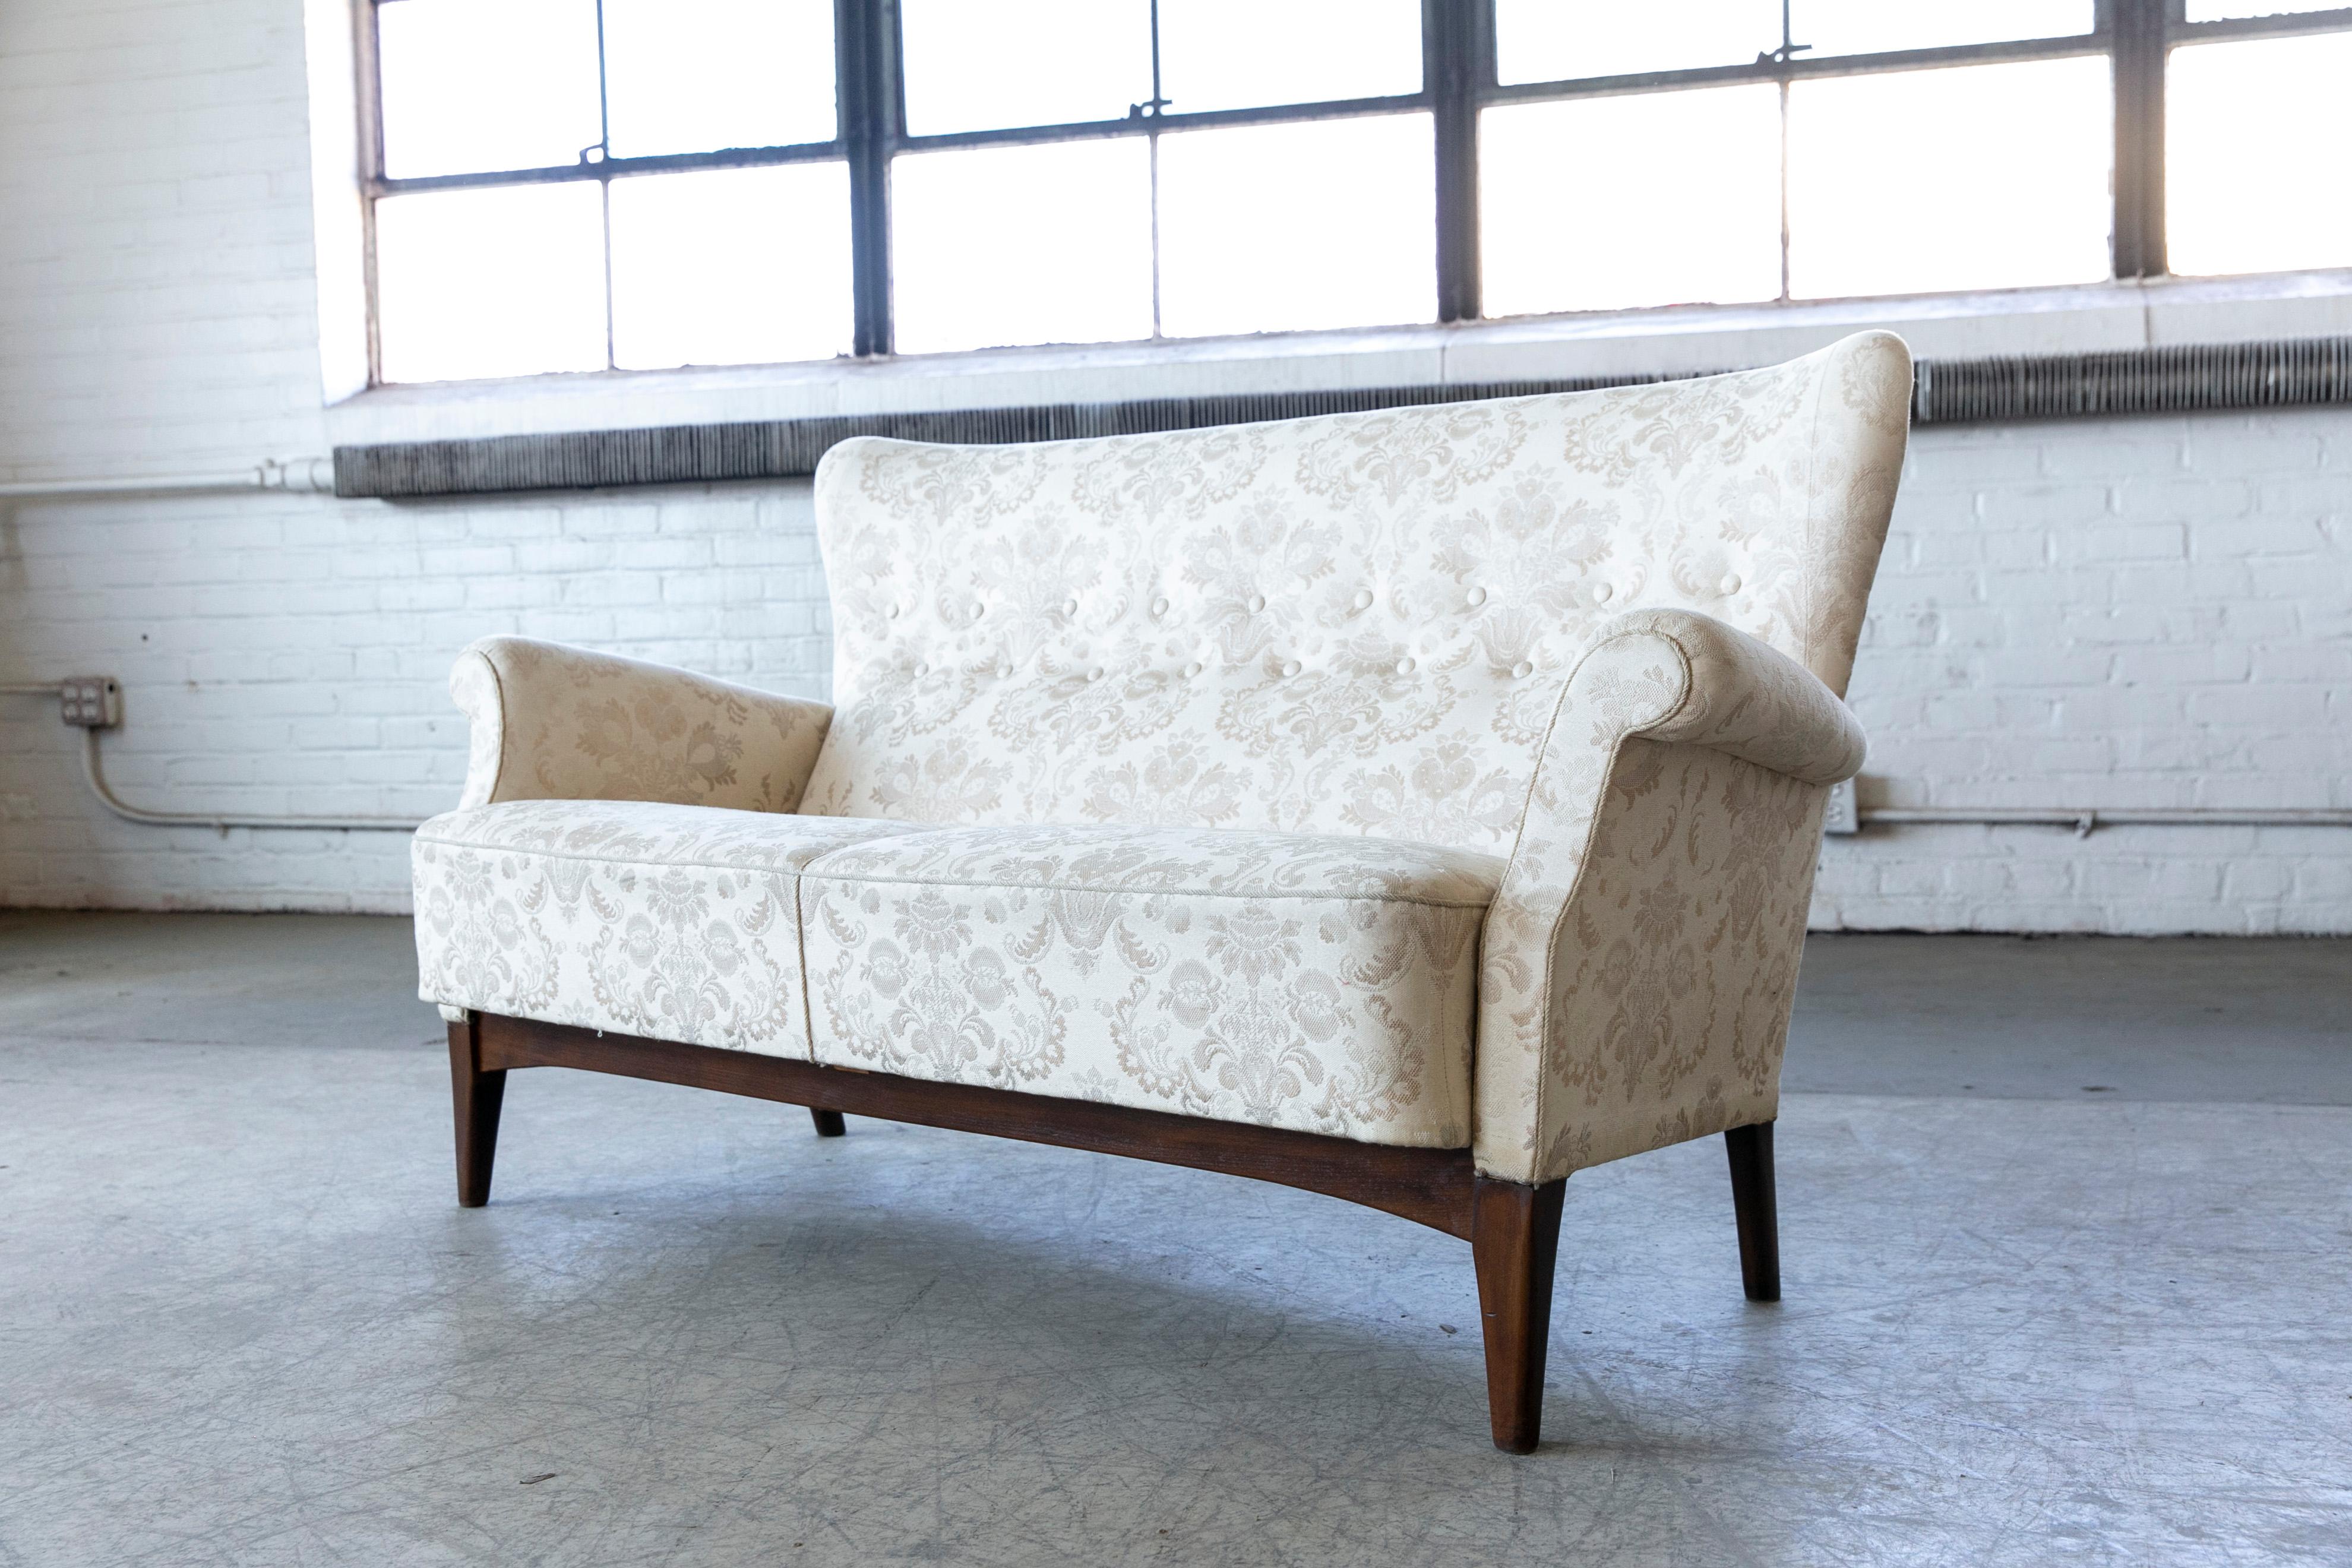 Very elegant settee or two-seat sofa model 8112 made by Fritz Hansen sometime in the early to mid-1950s in Copenhagen, Denmark. The frame is construed similar to Fritz Hansen's armchairs of the 1940s allowing it to be disassembled without use of